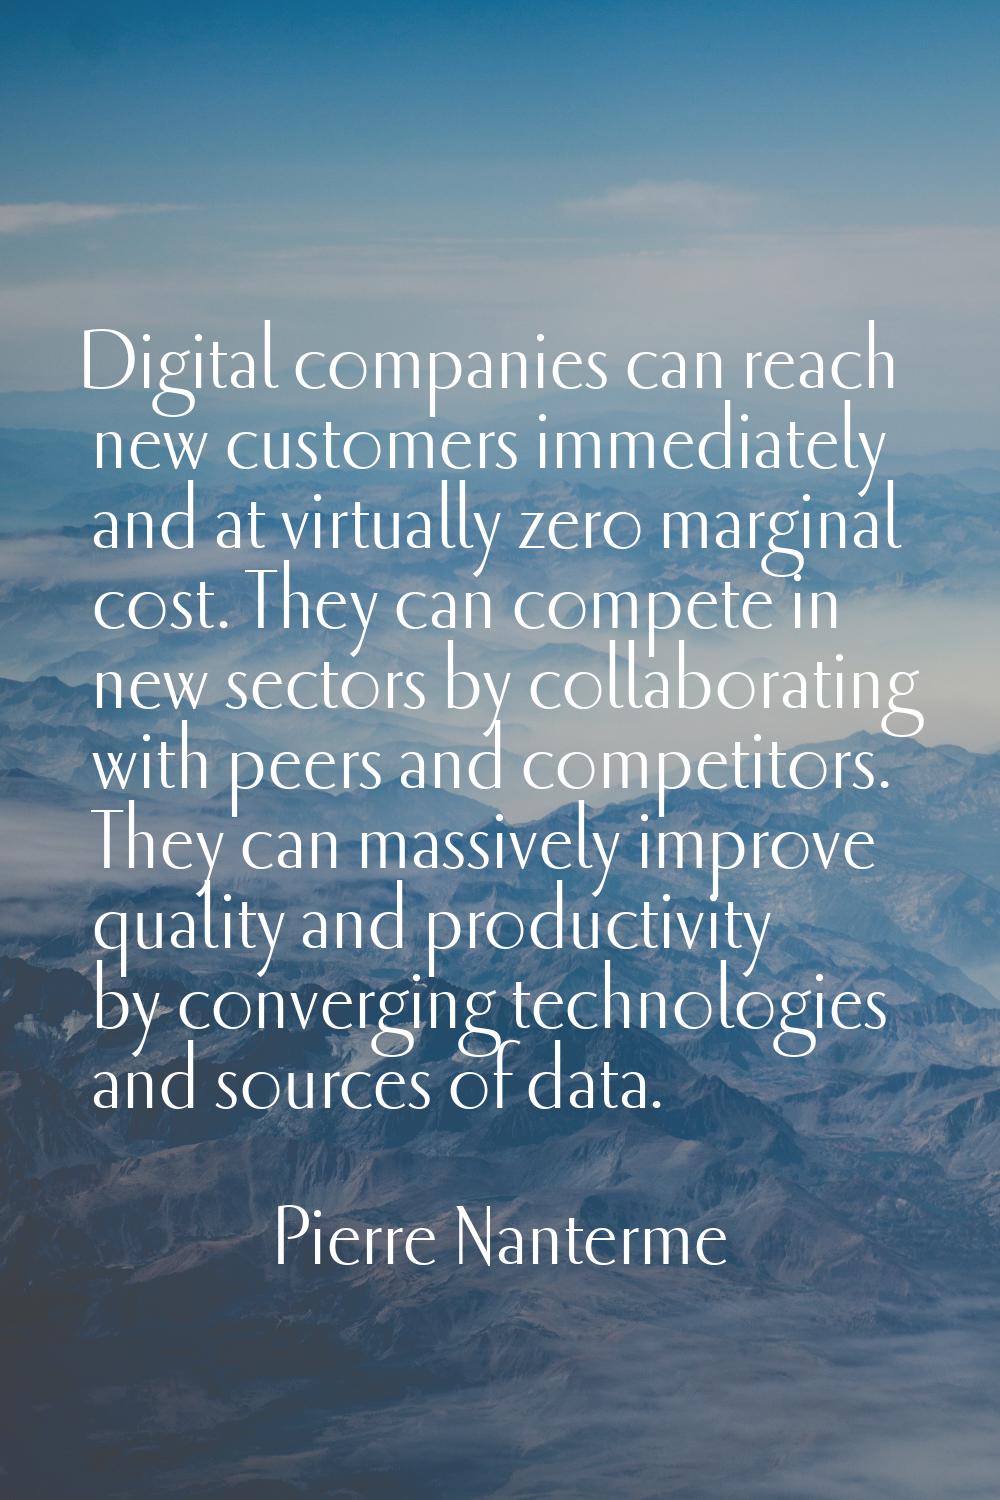 Digital companies can reach new customers immediately and at virtually zero marginal cost. They can